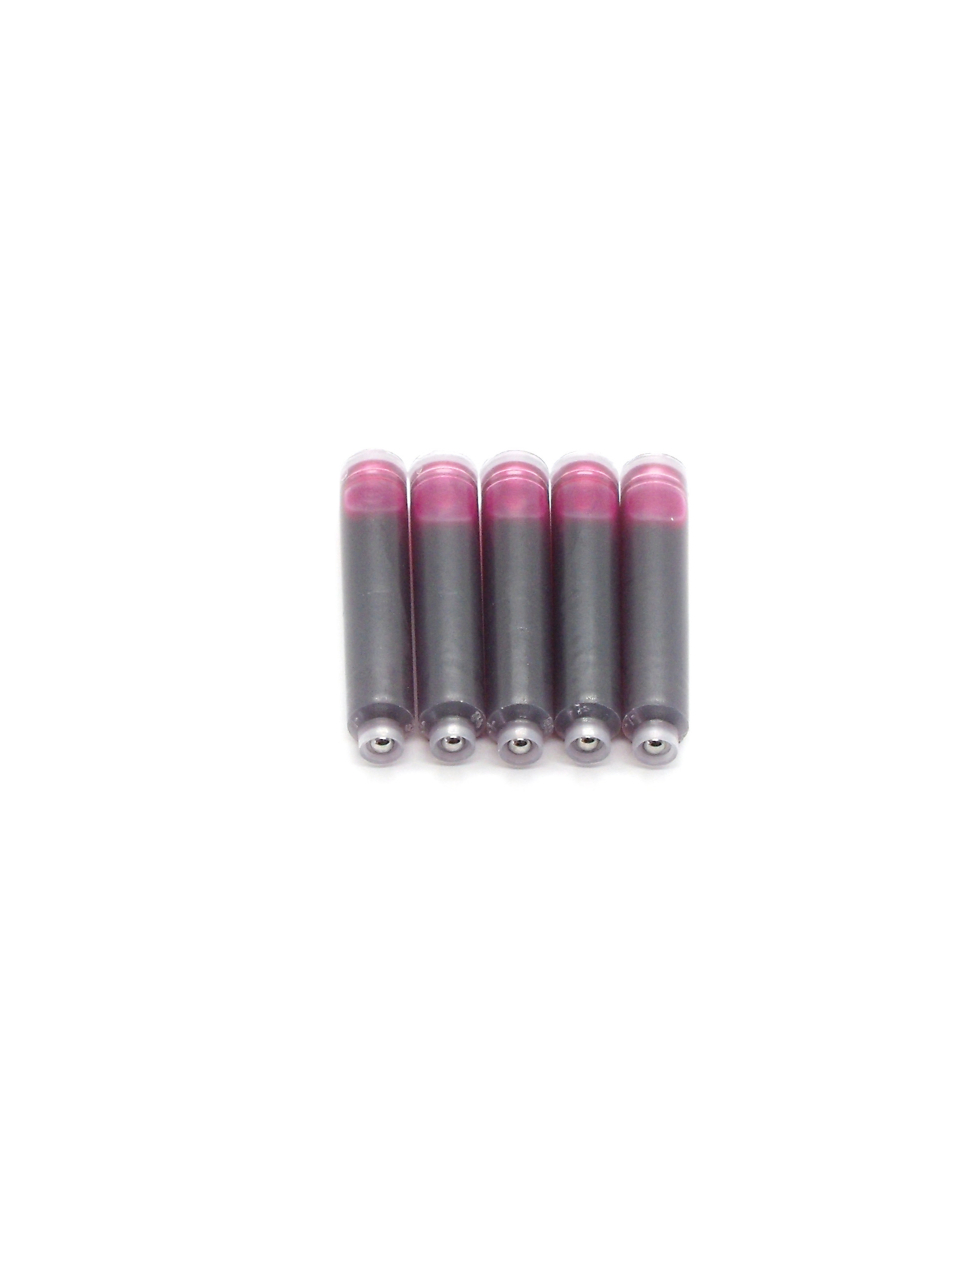 Top Ink Cartridges For Hauser Fountain Pens (Pink)